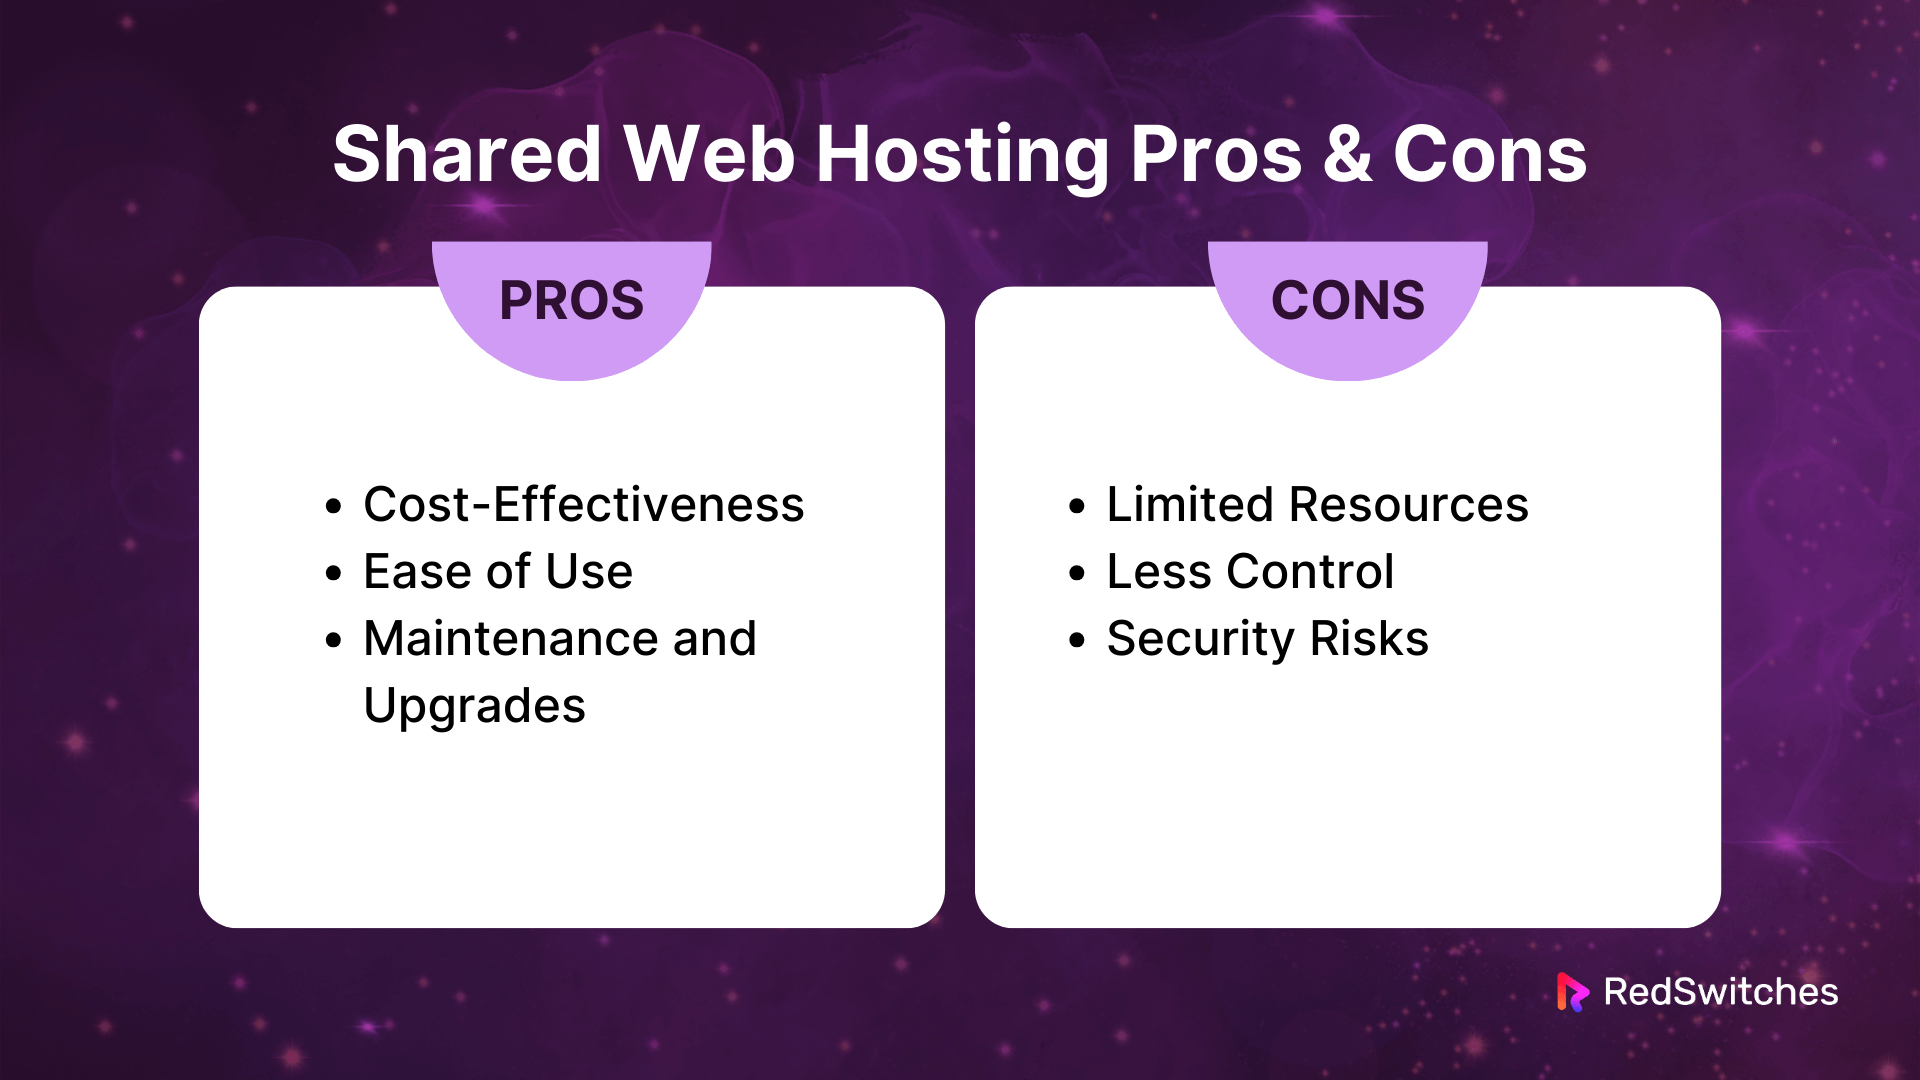 Shared Web Hosting Pros and Cons